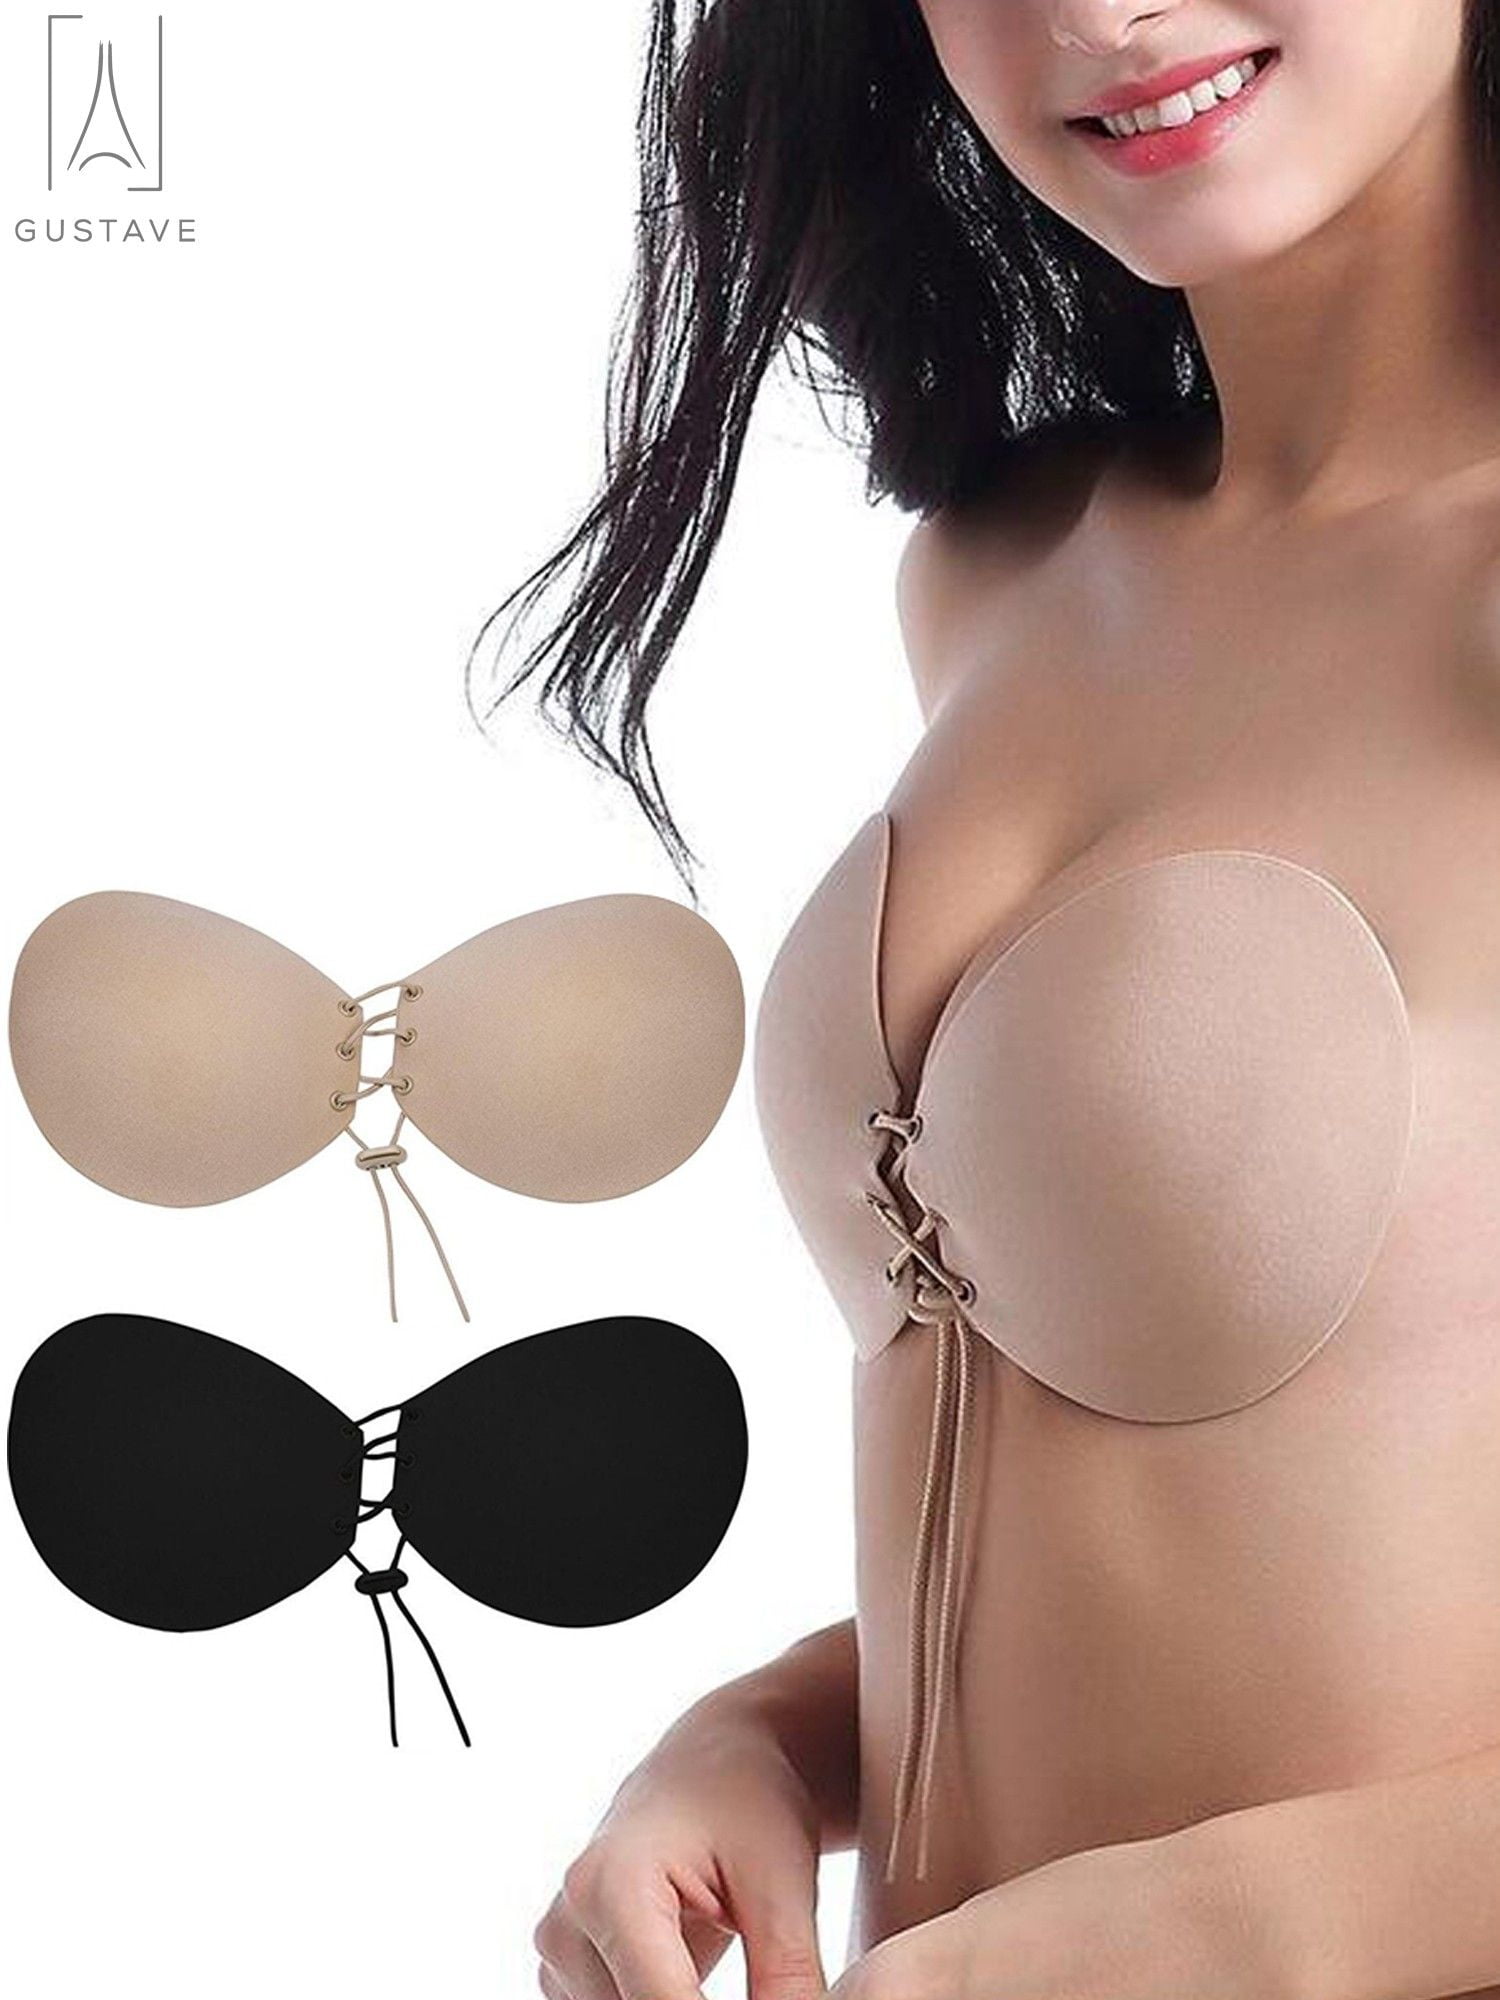 Gustavedesign 2-Pack Self Adhesive Bra Strapless Sticky Invisible